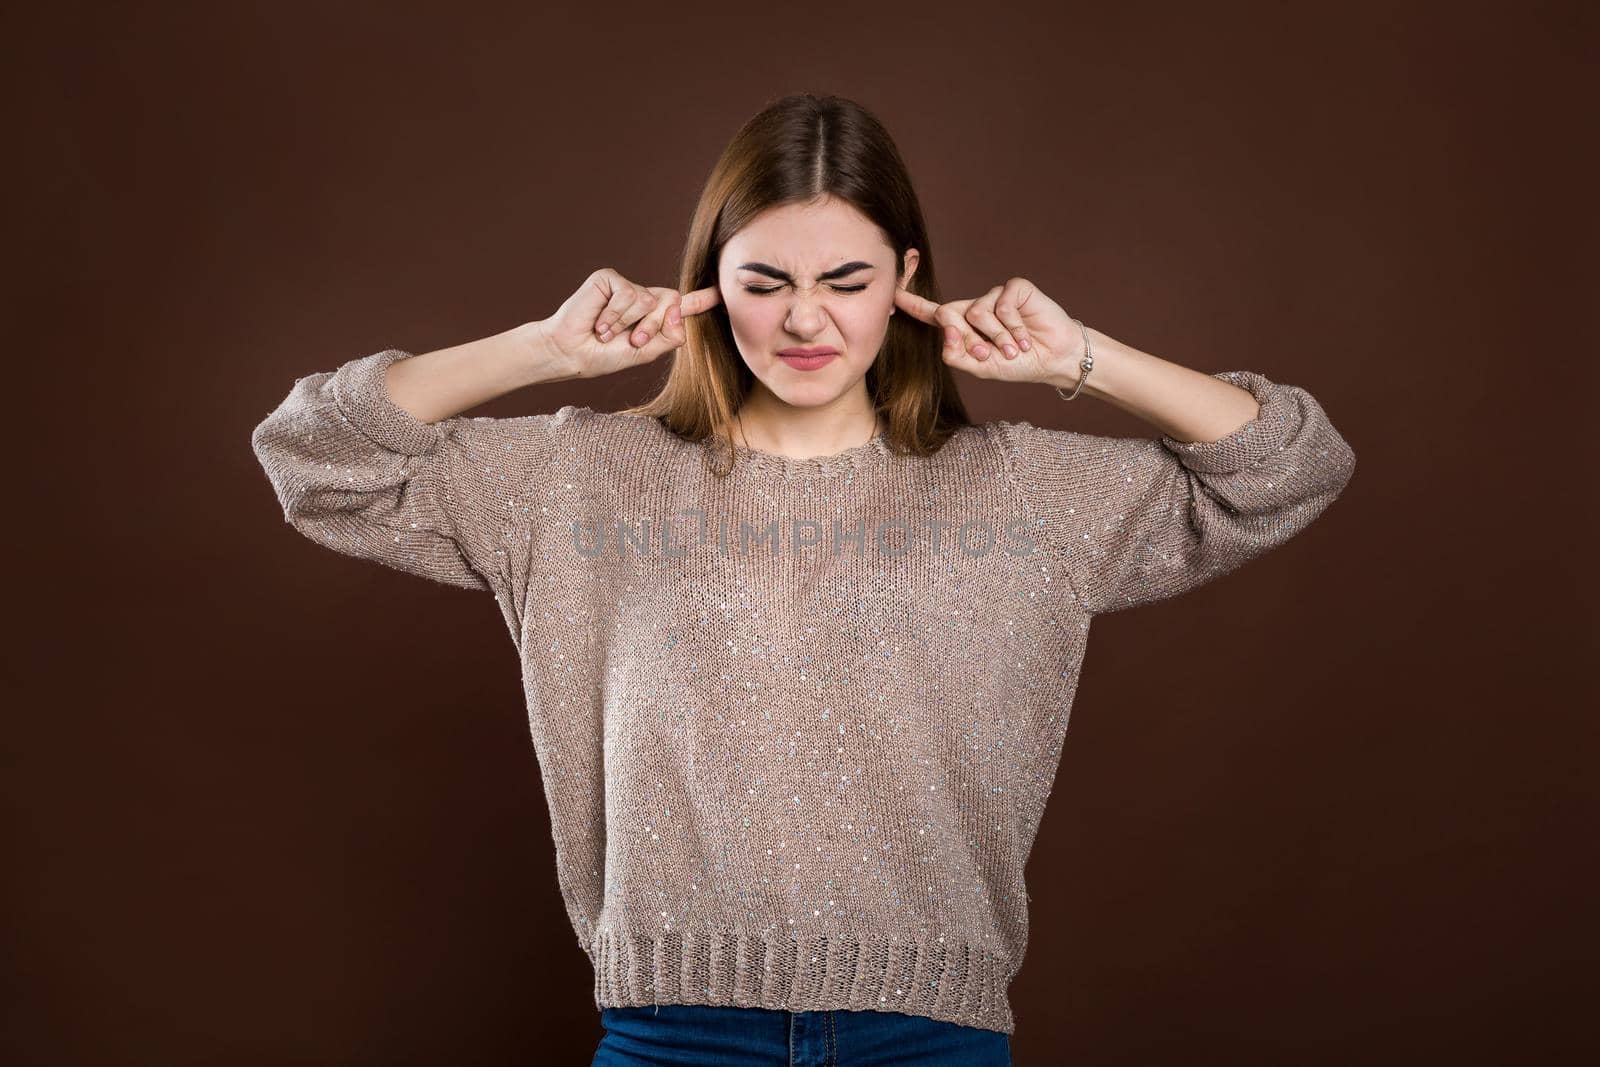 Close up portrait of angry stressed out young woman plugging ears with fingers, irritated with loud annoying noise, having headache or migraine. Negative human emotions